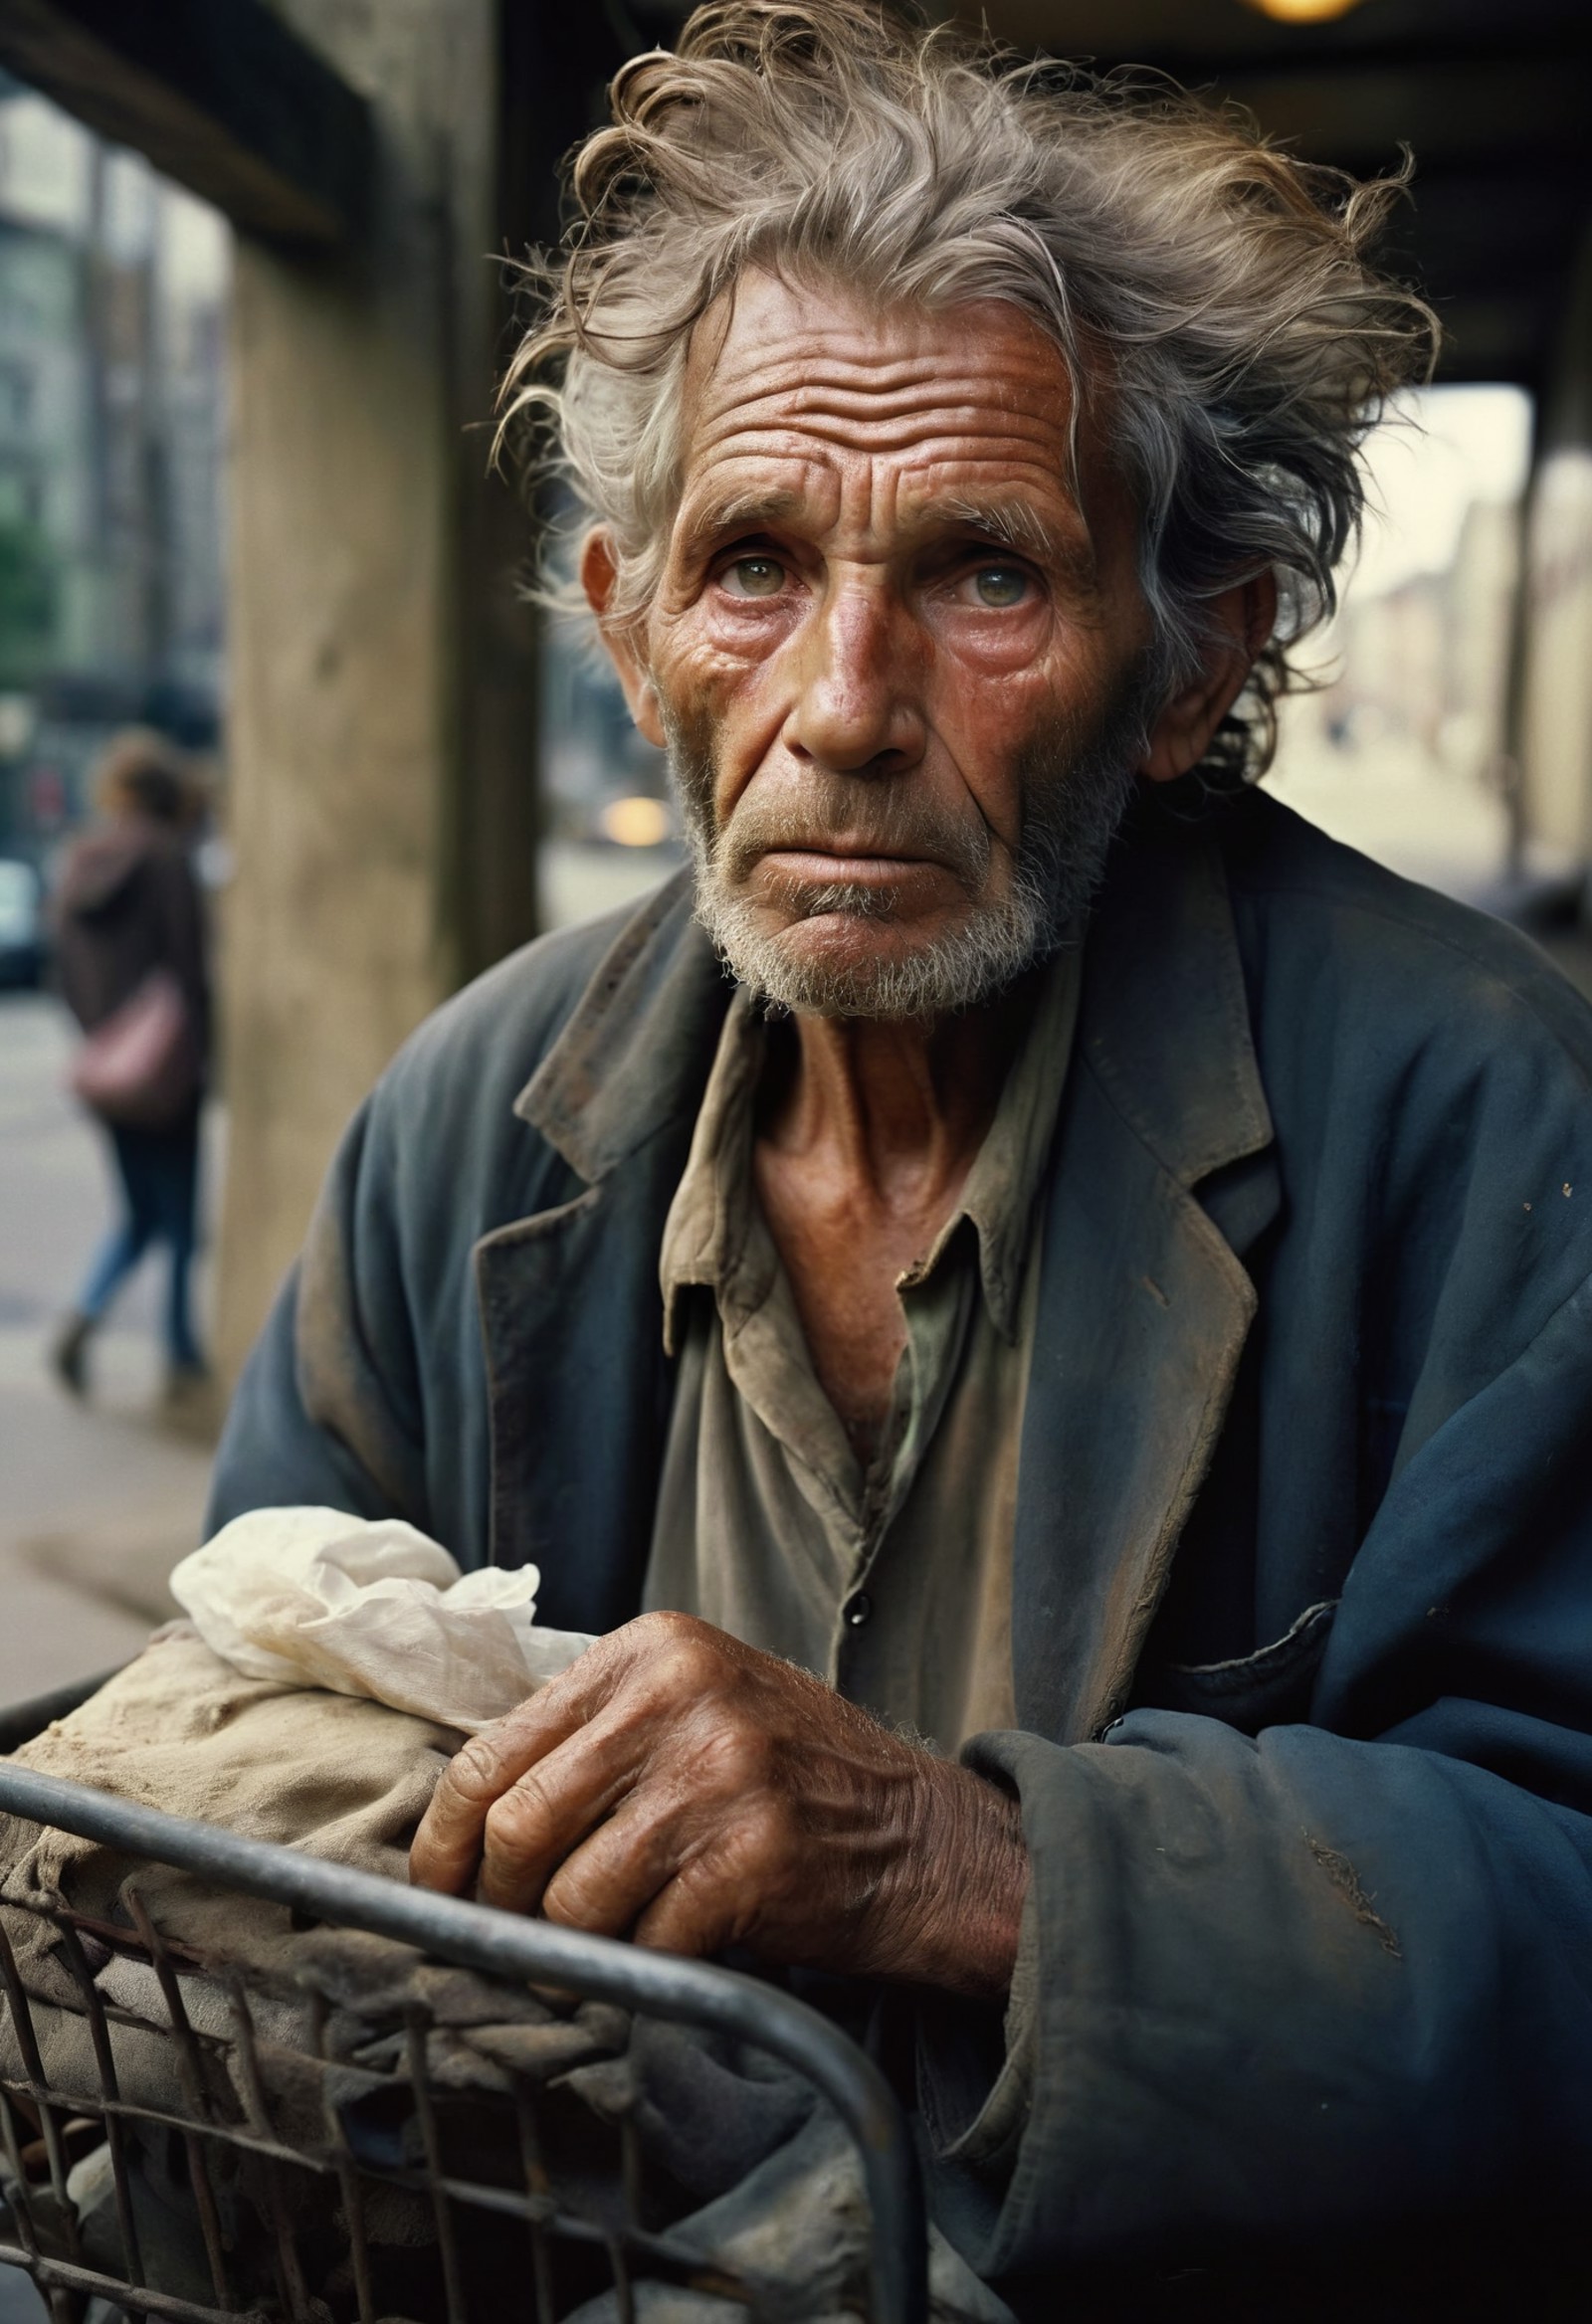 Professional RAW photo, wide mid shot, a homeless man, wrinkled face, his facial expression tells the story of a long trou...